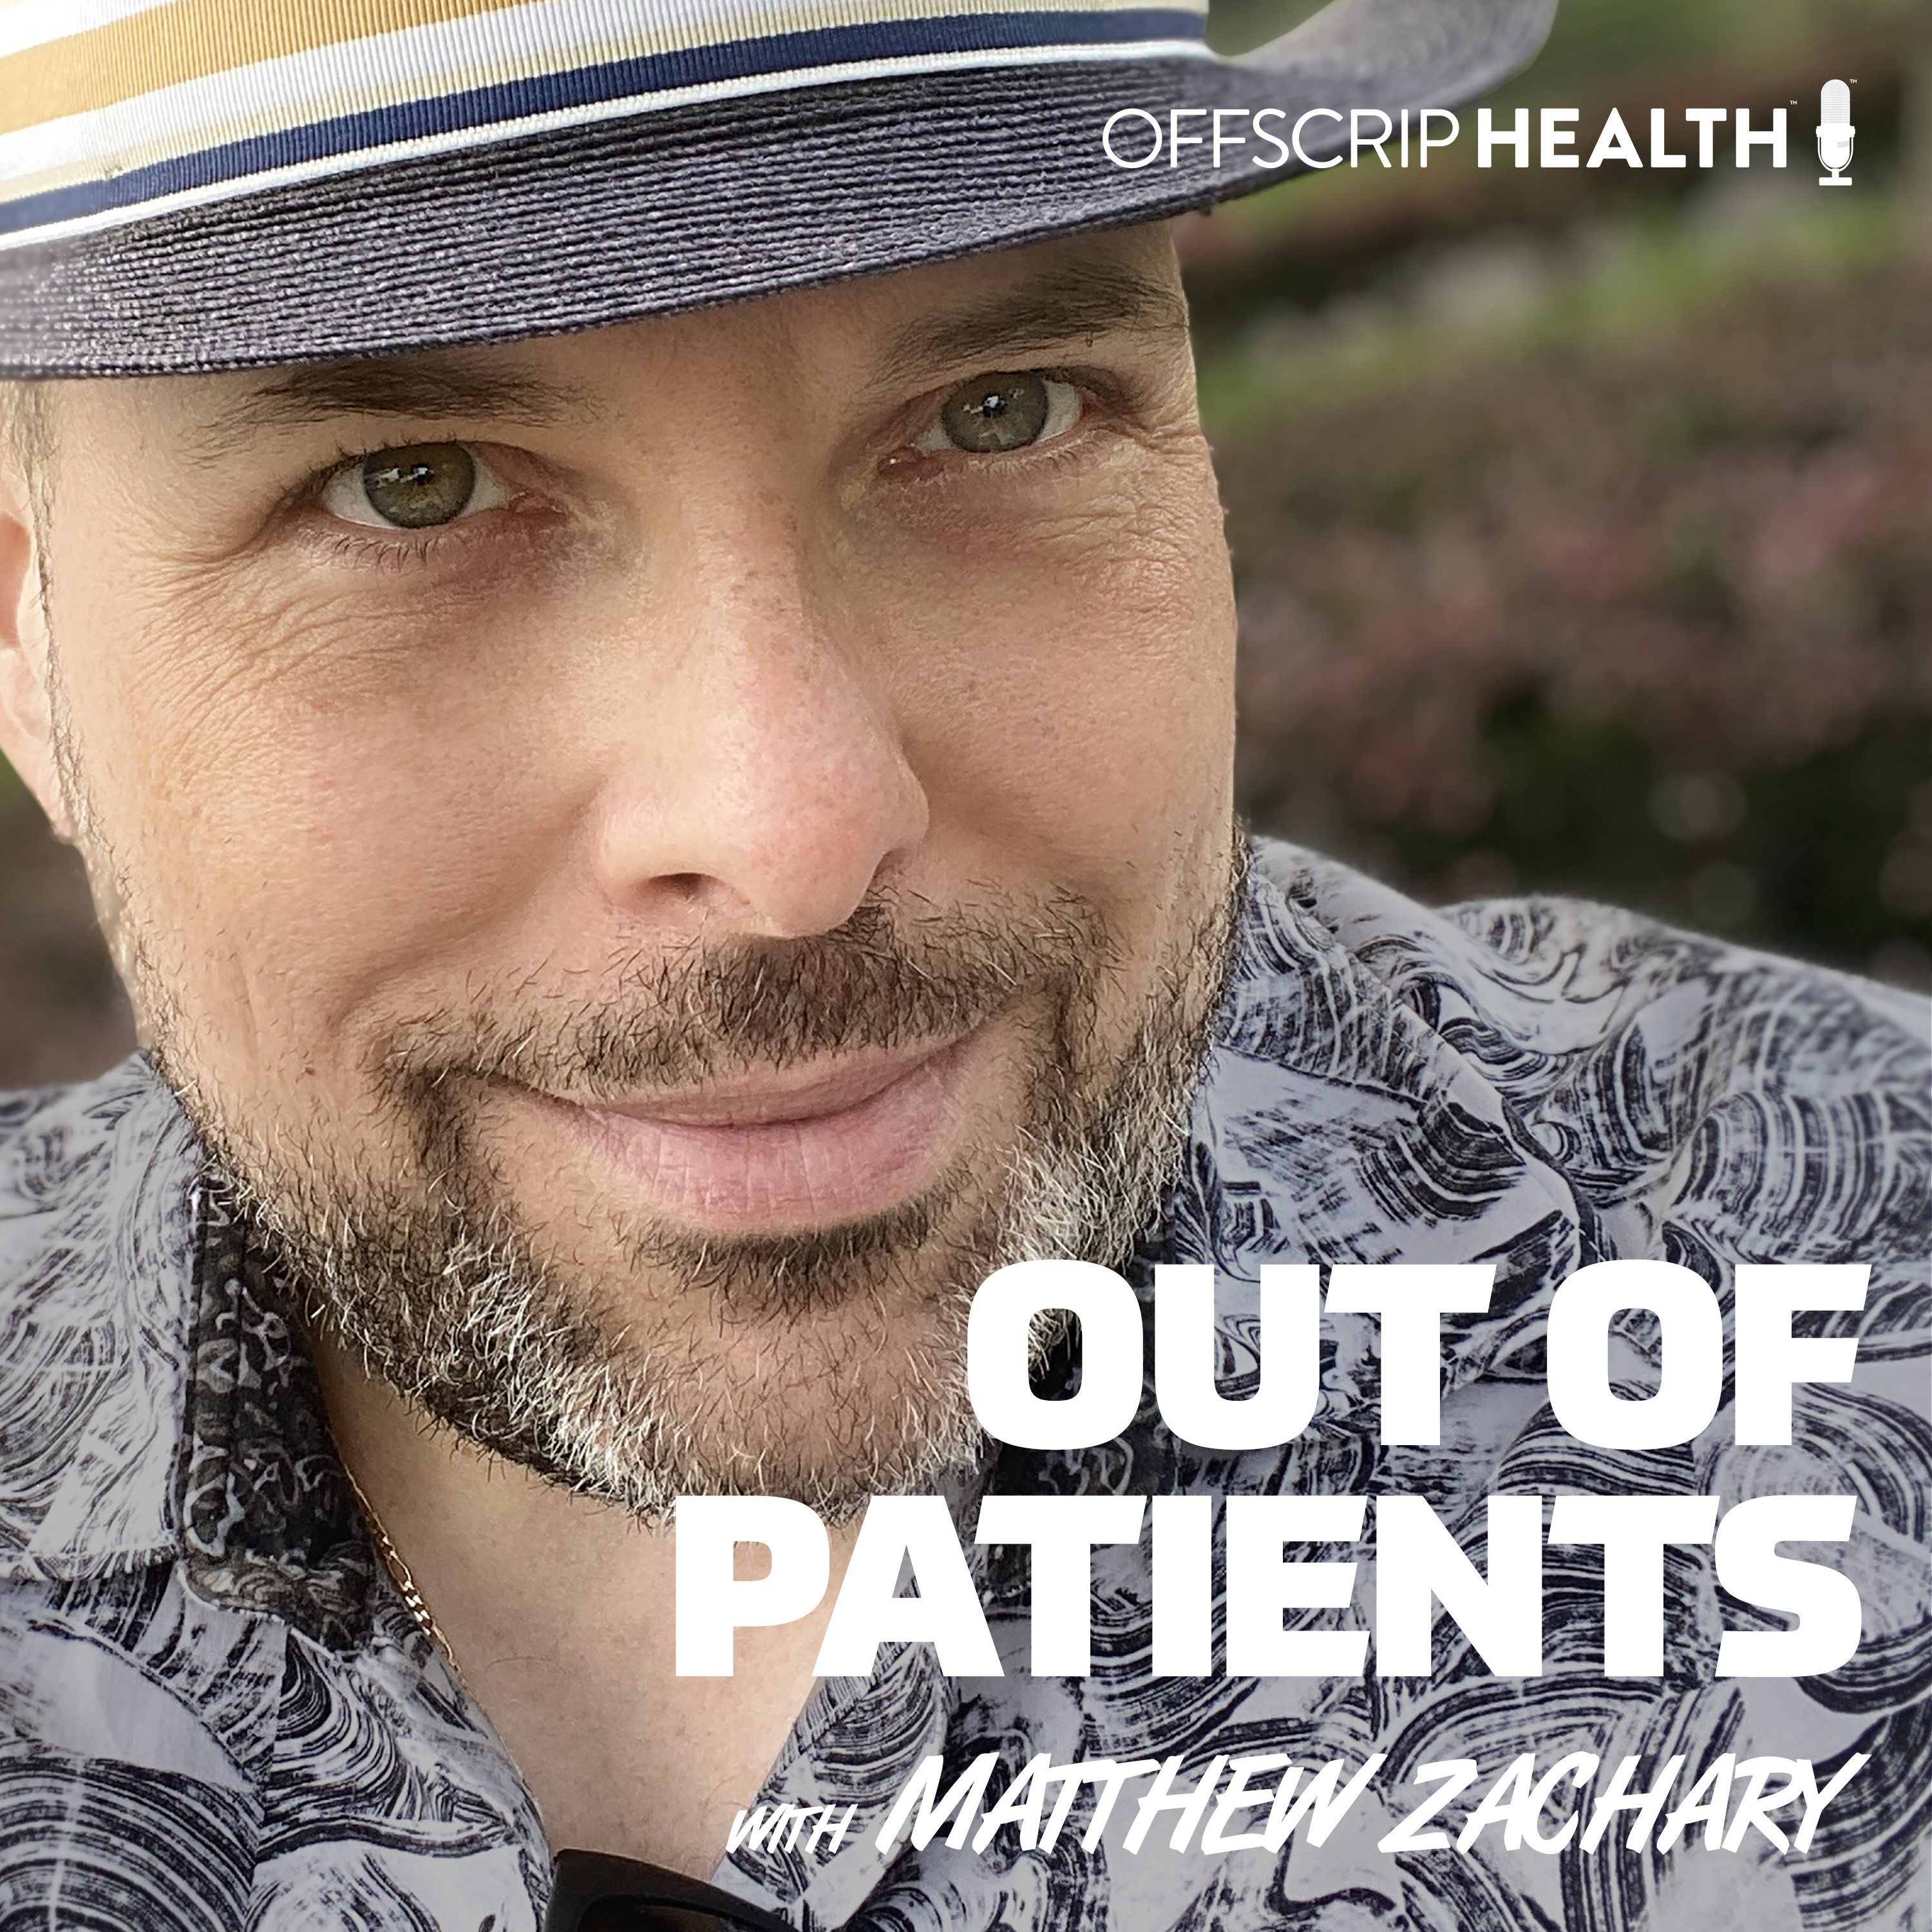 The One With Matt Holt: Self-Proclaimed “Healthcare Curmudgeon”